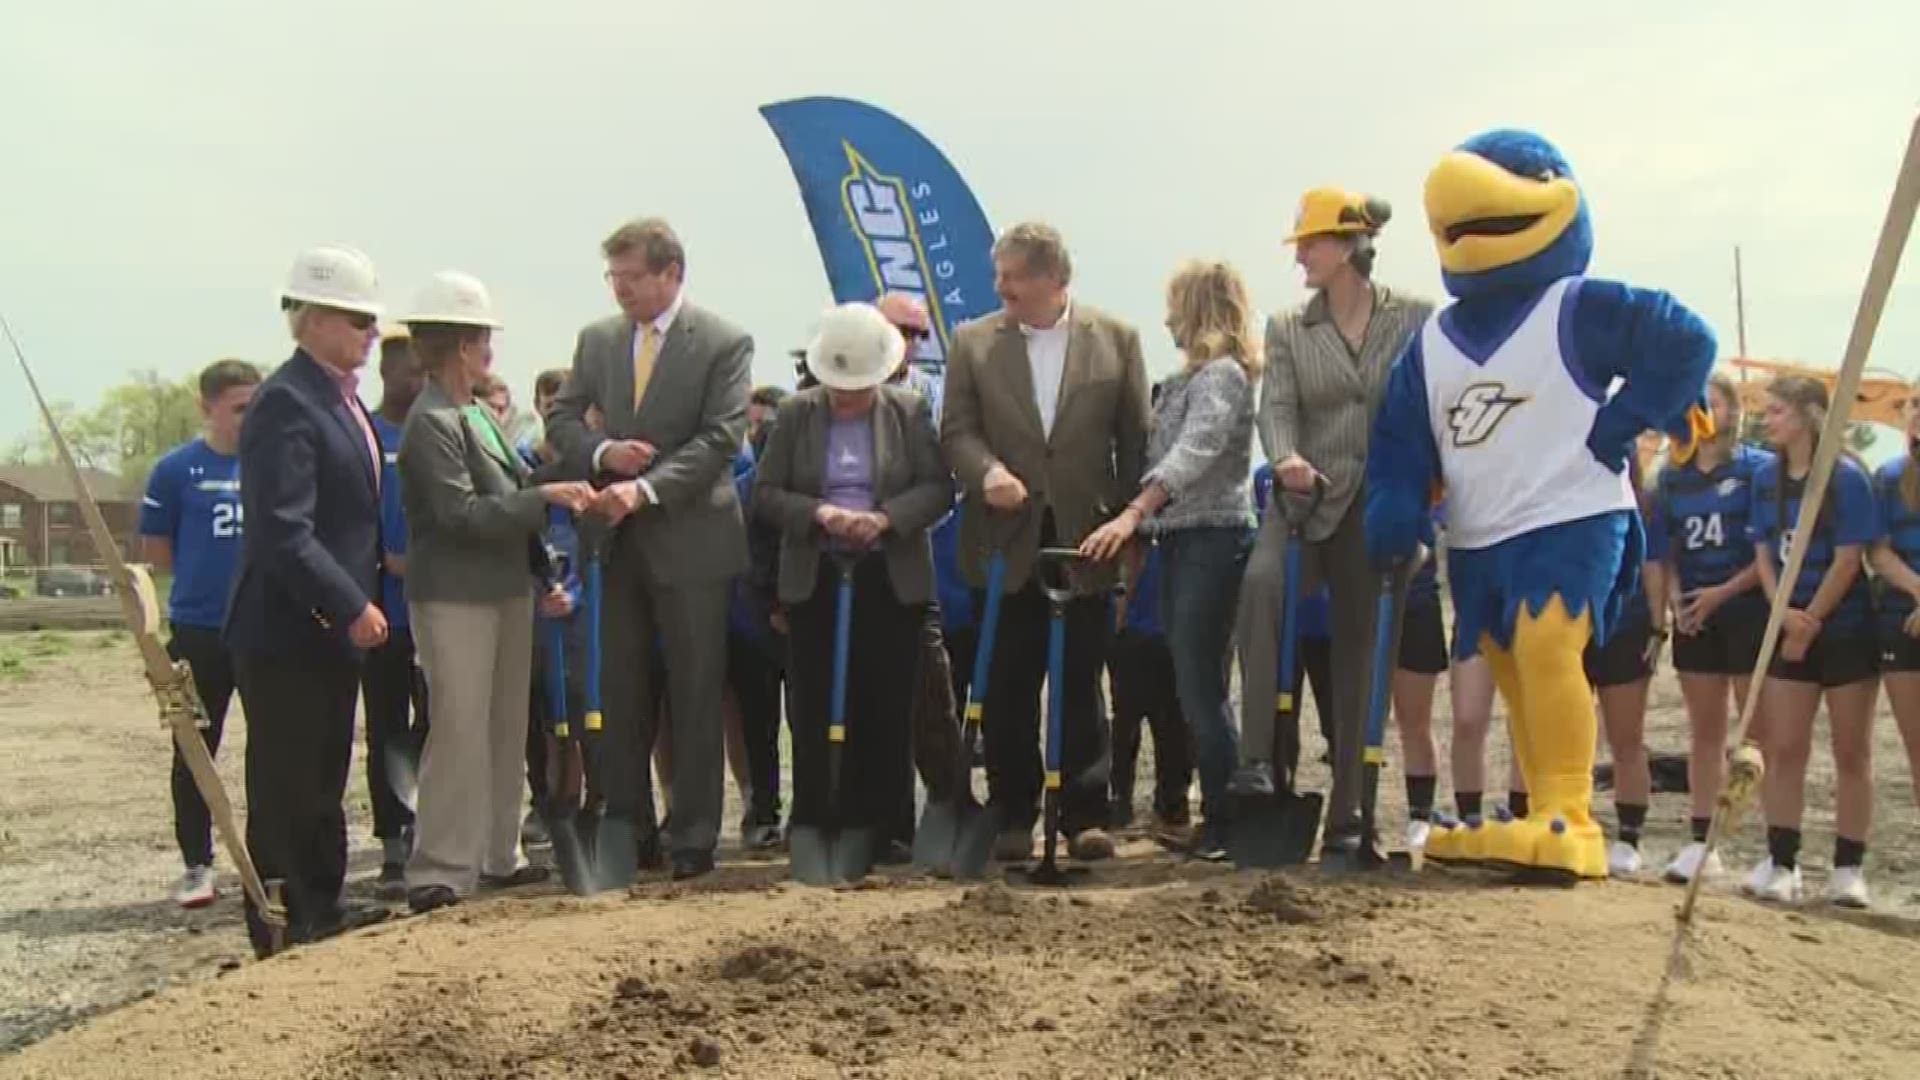 After years of planning, Spalding University broke ground on a new complex consisting of a turf softball field and two turf soccer fields.